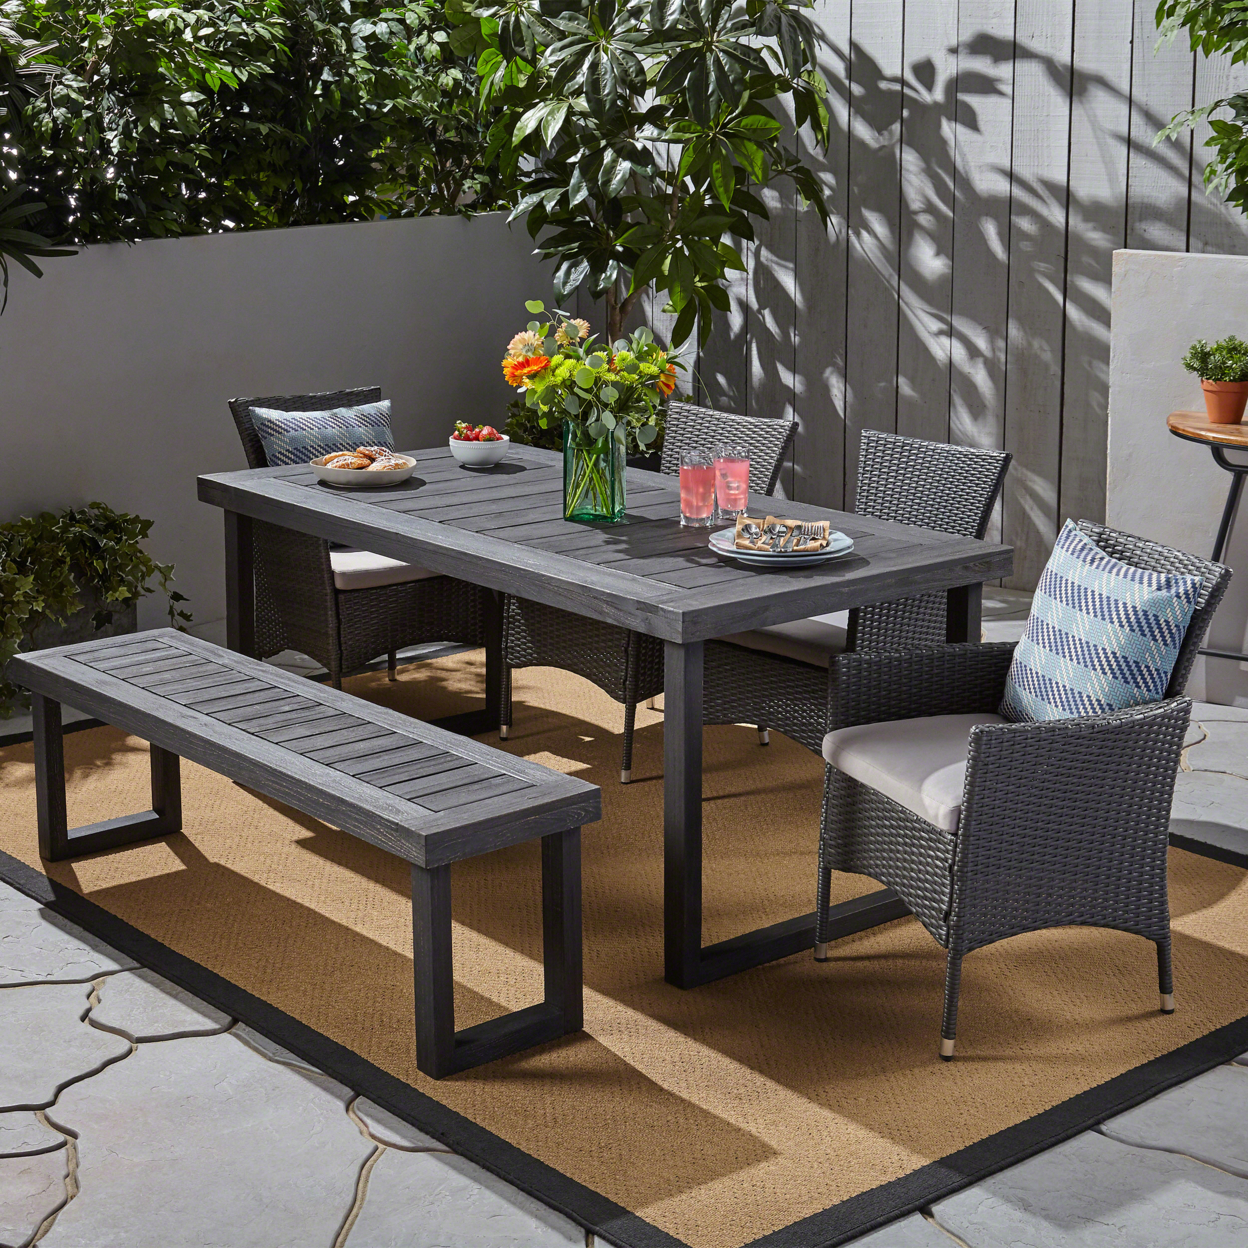 Arrow Outdoor 6-Seater Aluminum Dining Set With Wicker Chairs And Bench - Sandblast Dark Grey + Gray + Silver